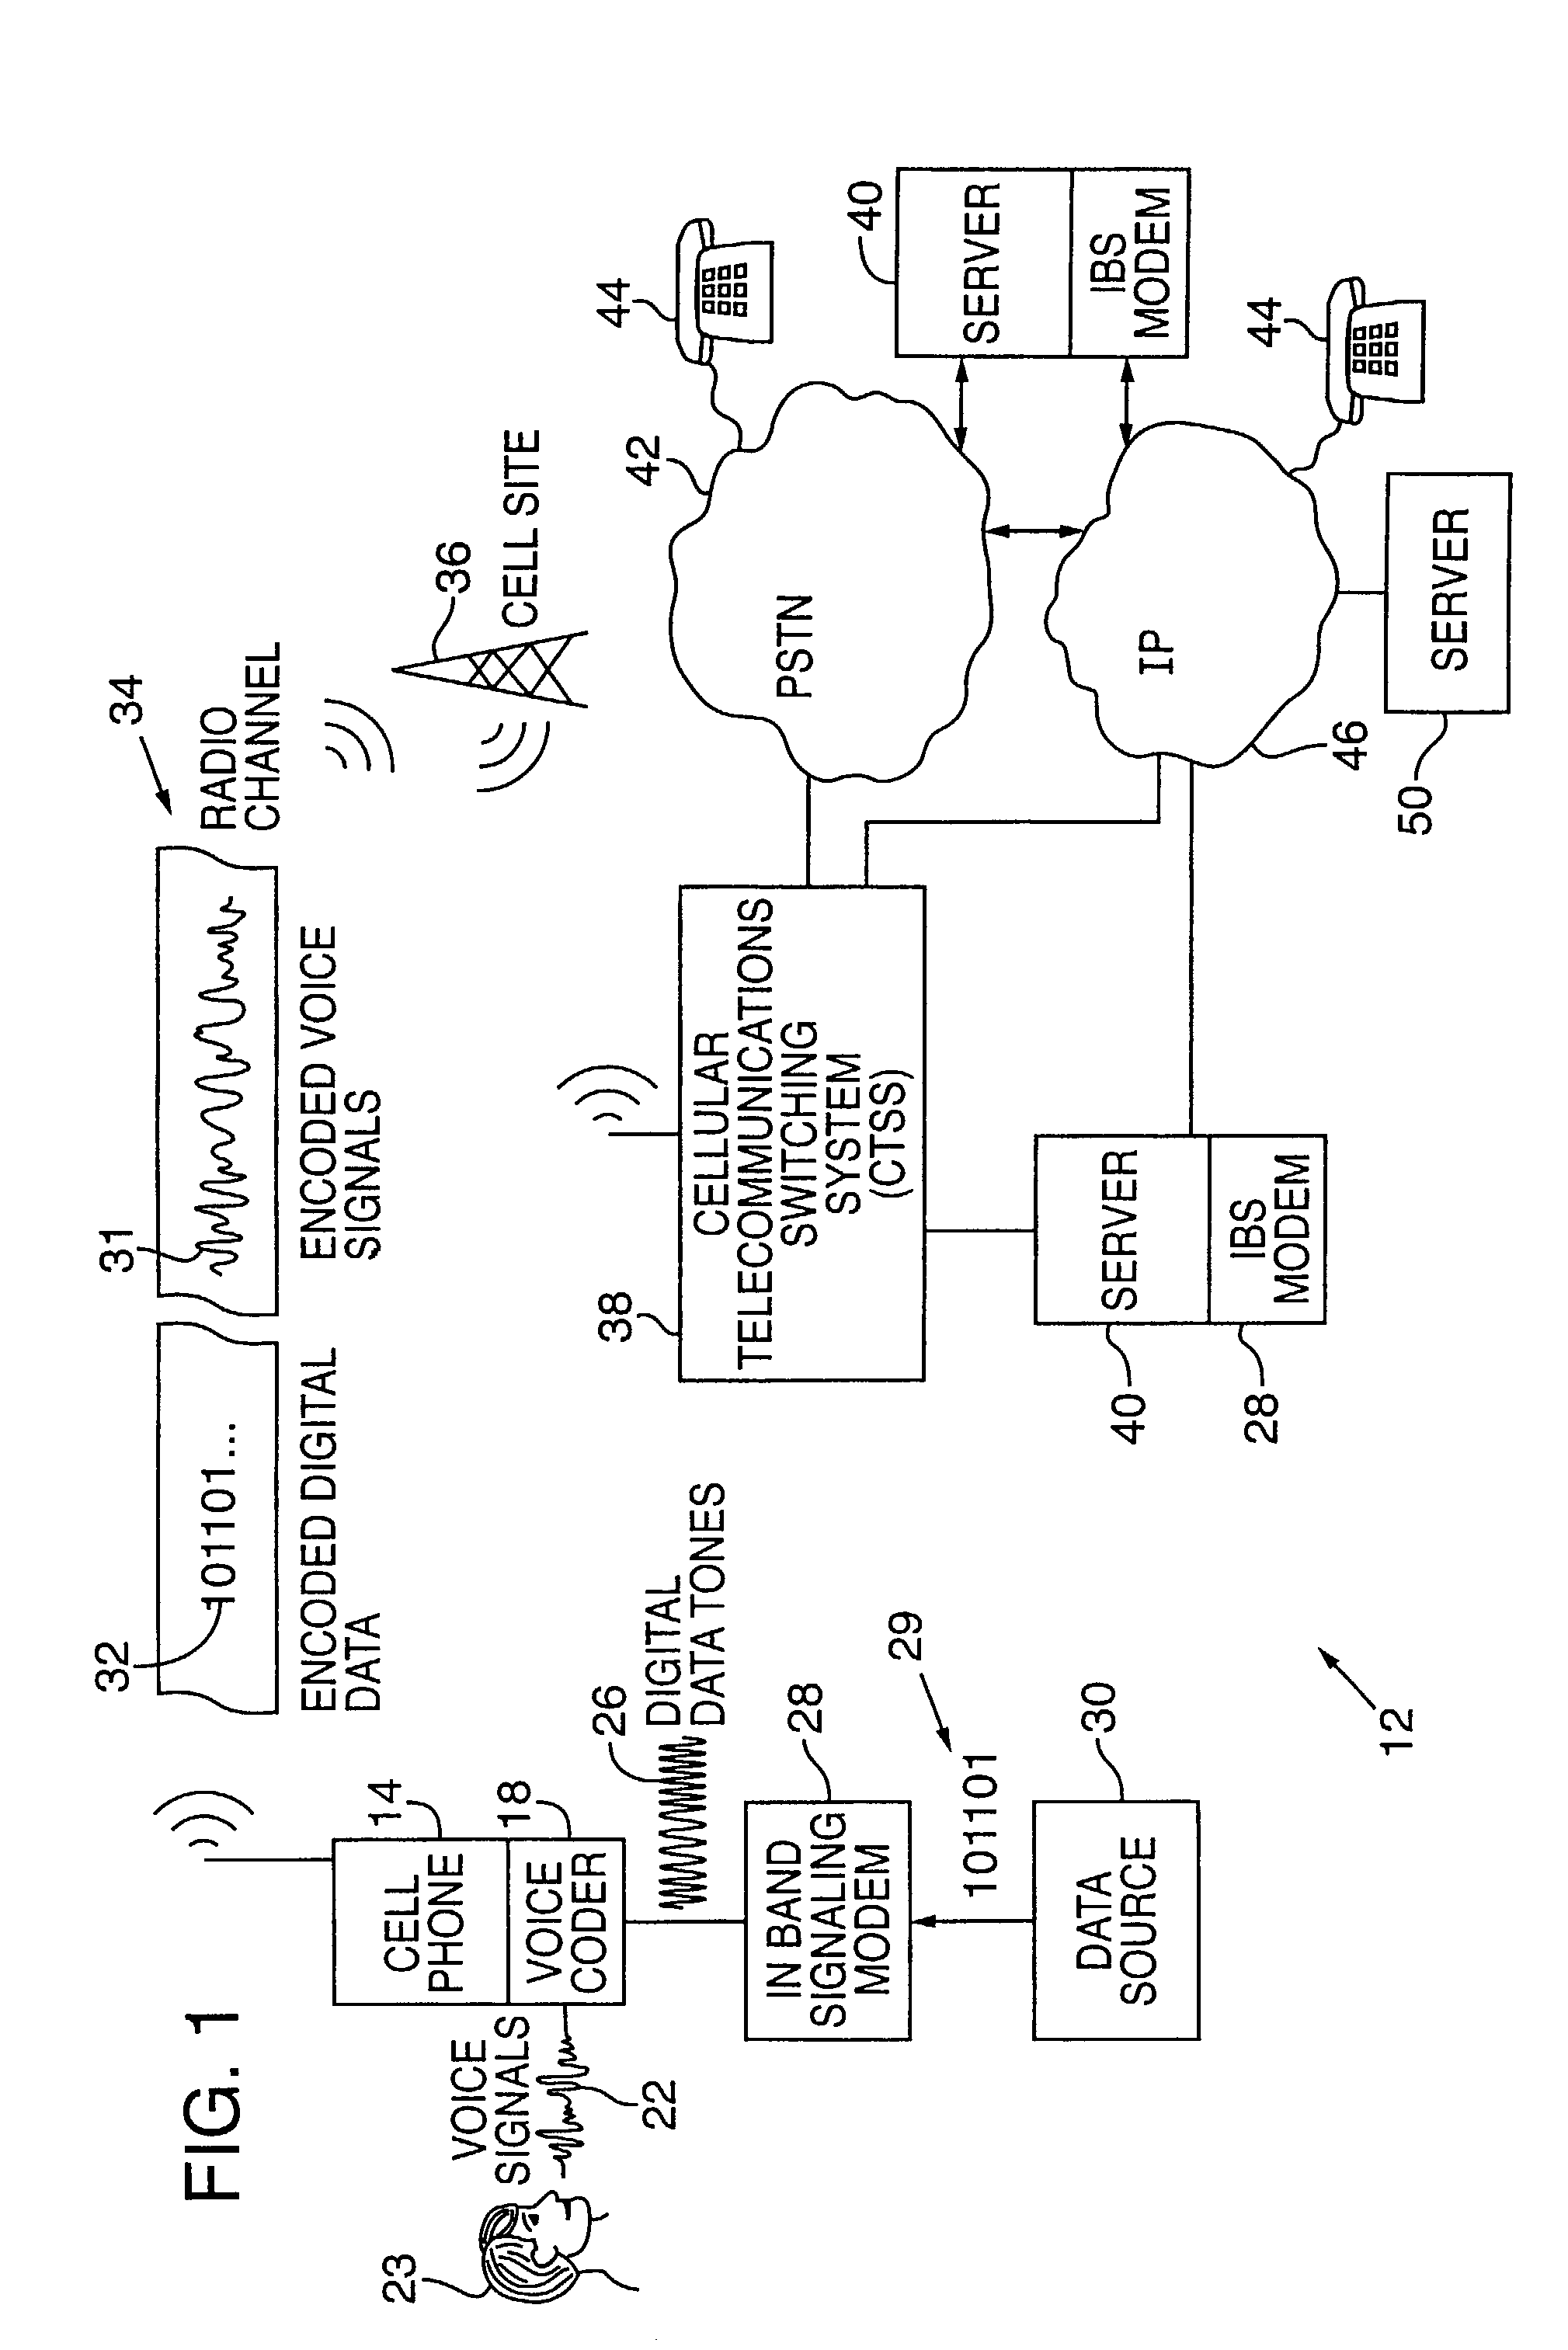 Synchronizer for use with improved in-band signaling for data communications over digital wireless telecommunications networks